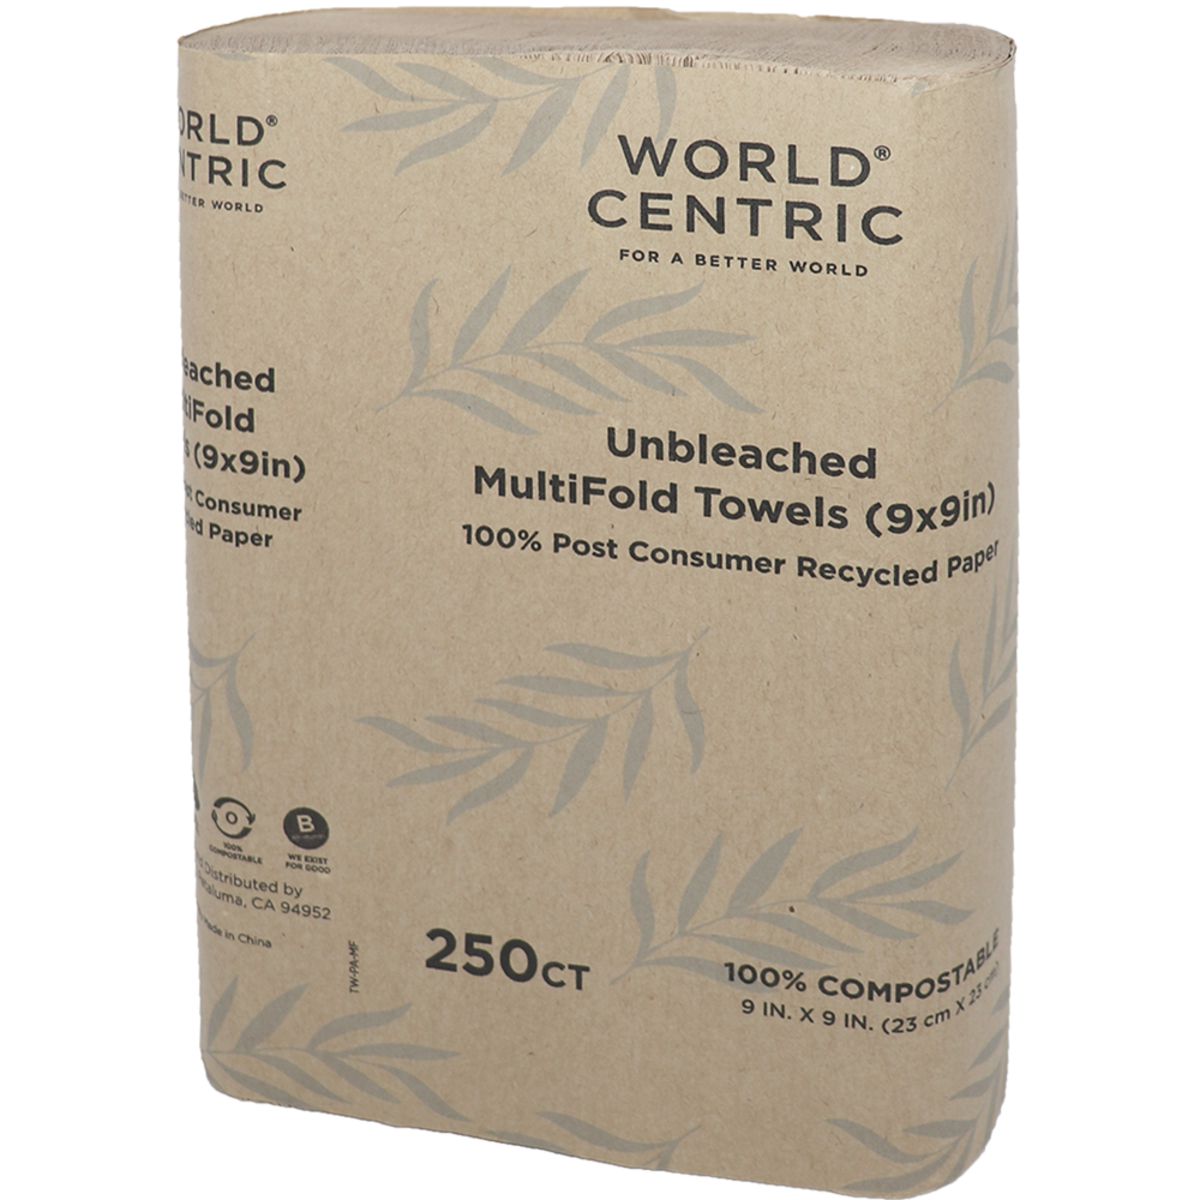 MultiFold Towels, 3x9” (1-ply) | 4000/case - World Centric